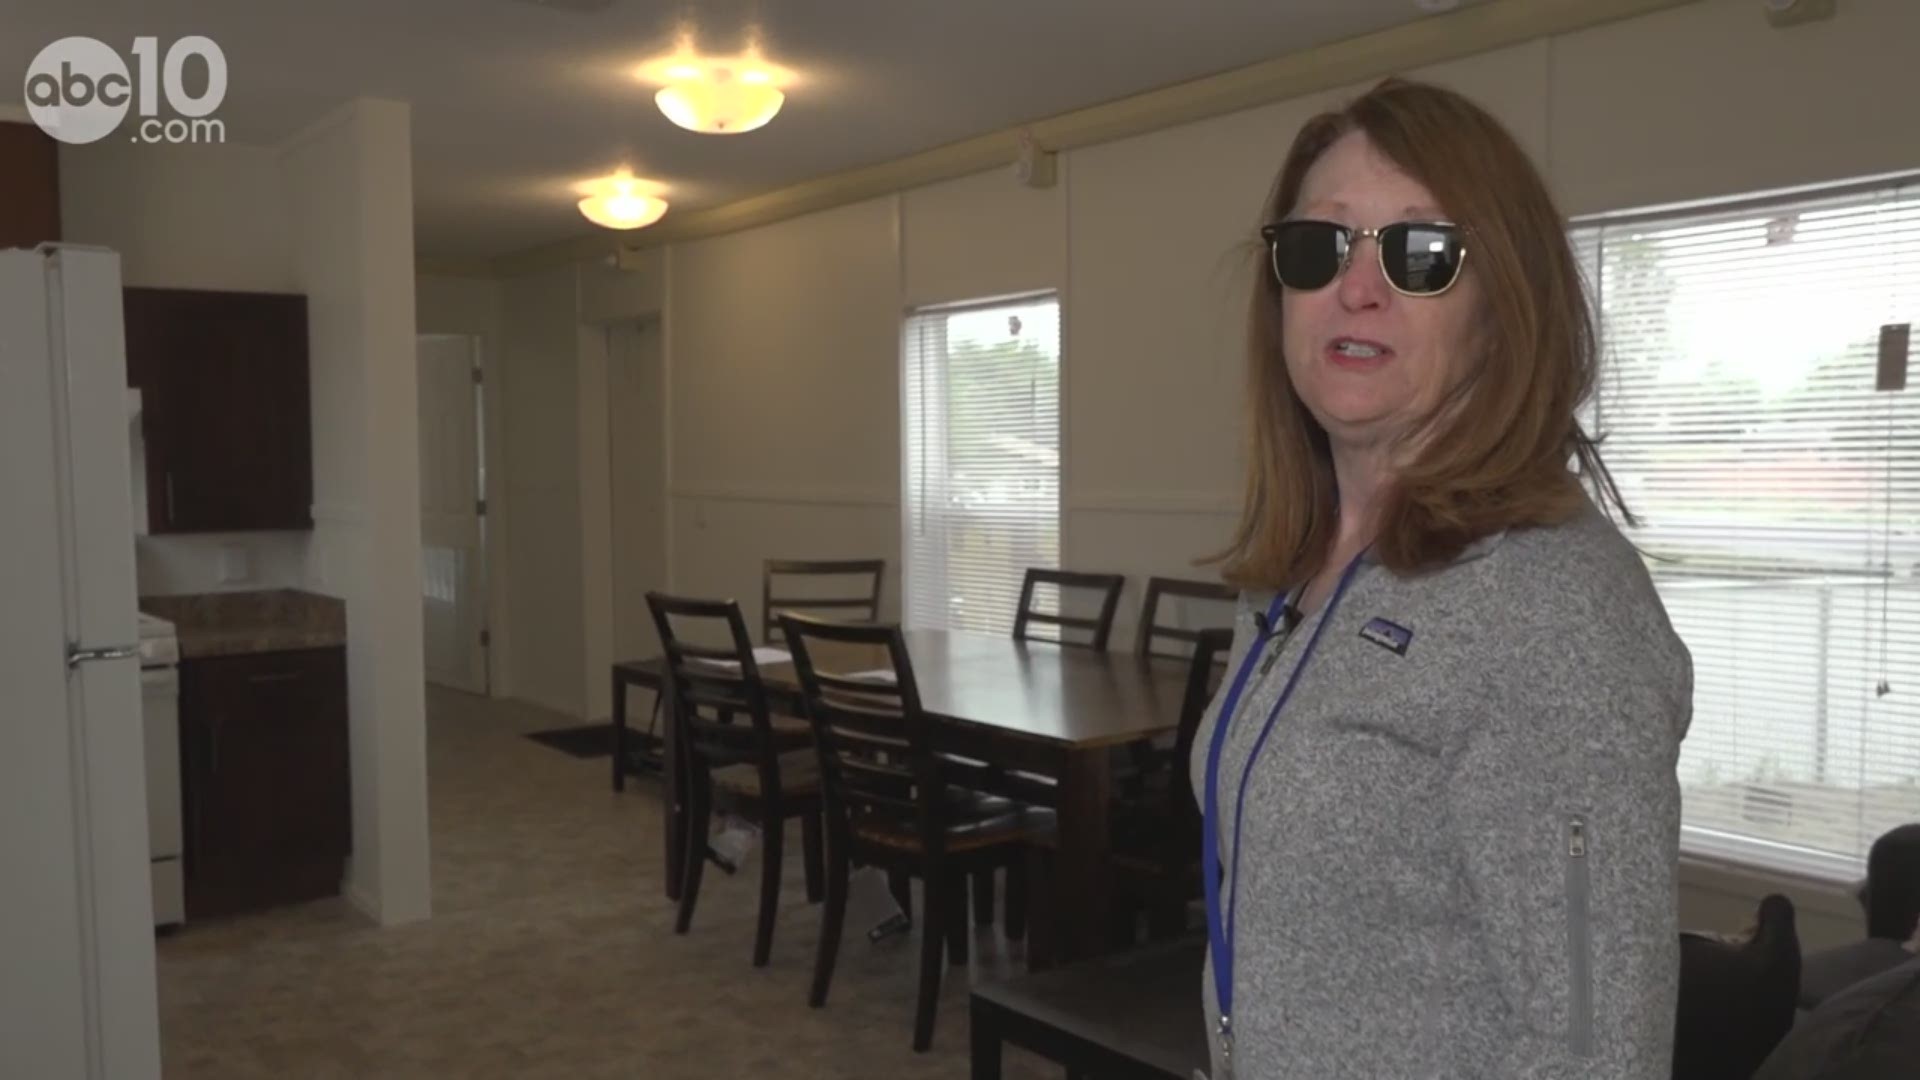 Take a look inside a temporary housing community for Camp Fire survivors. FEMA opened Rosewood Estates in Oroville, California. It will house 40 families through July 2020.